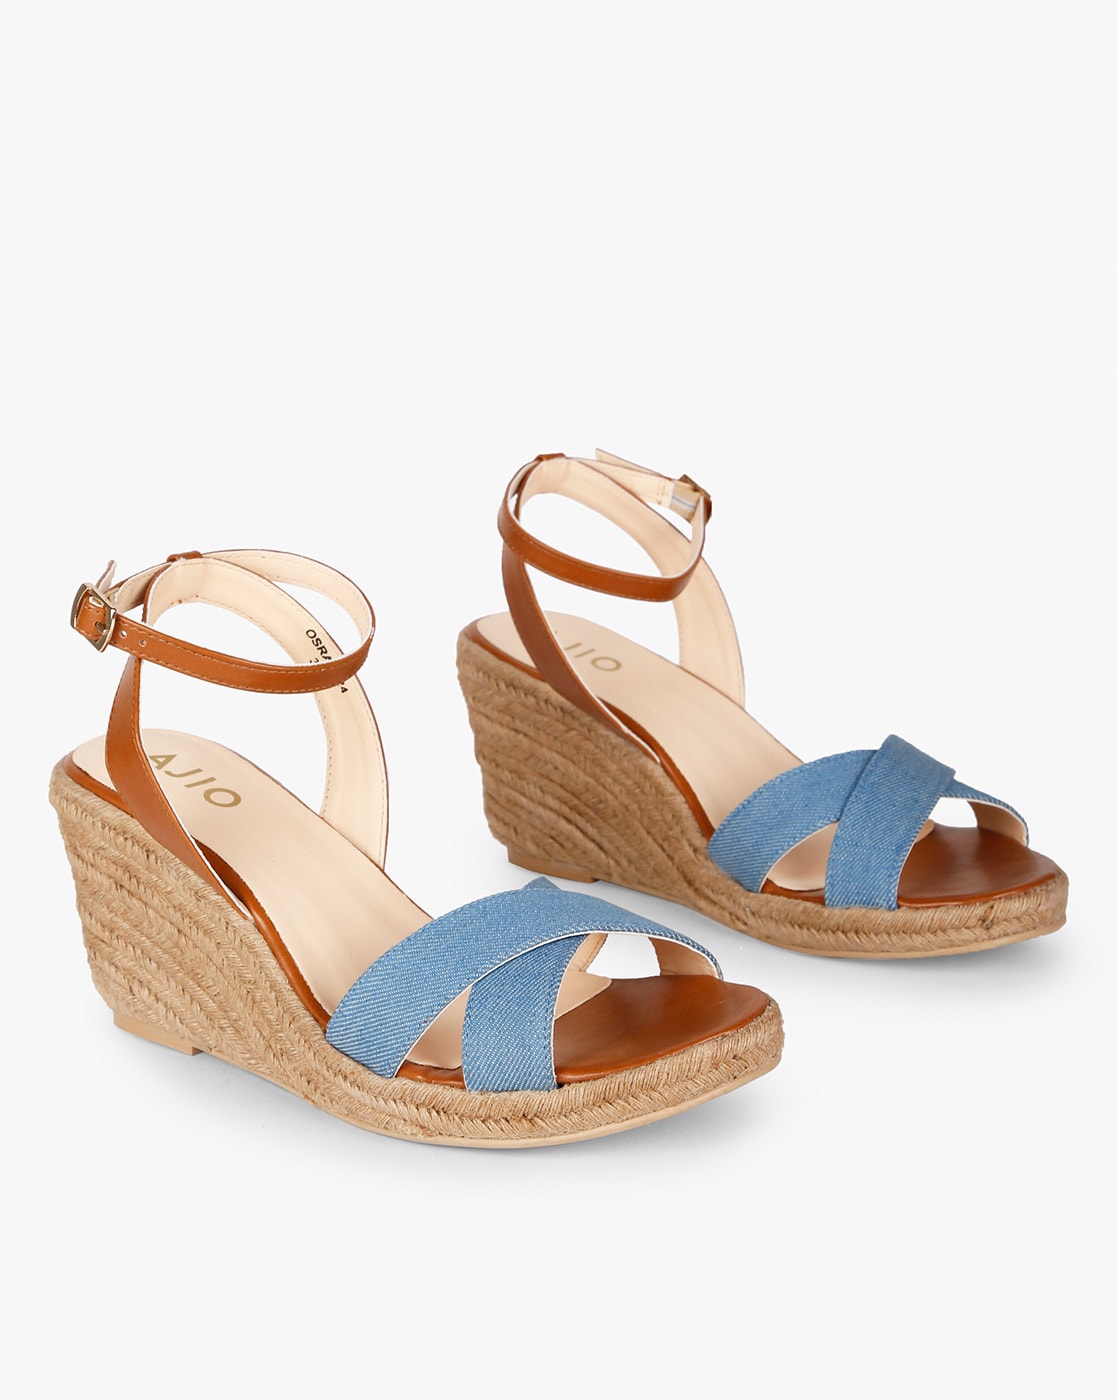 Buy Blue Heeled Sandals for Women by 